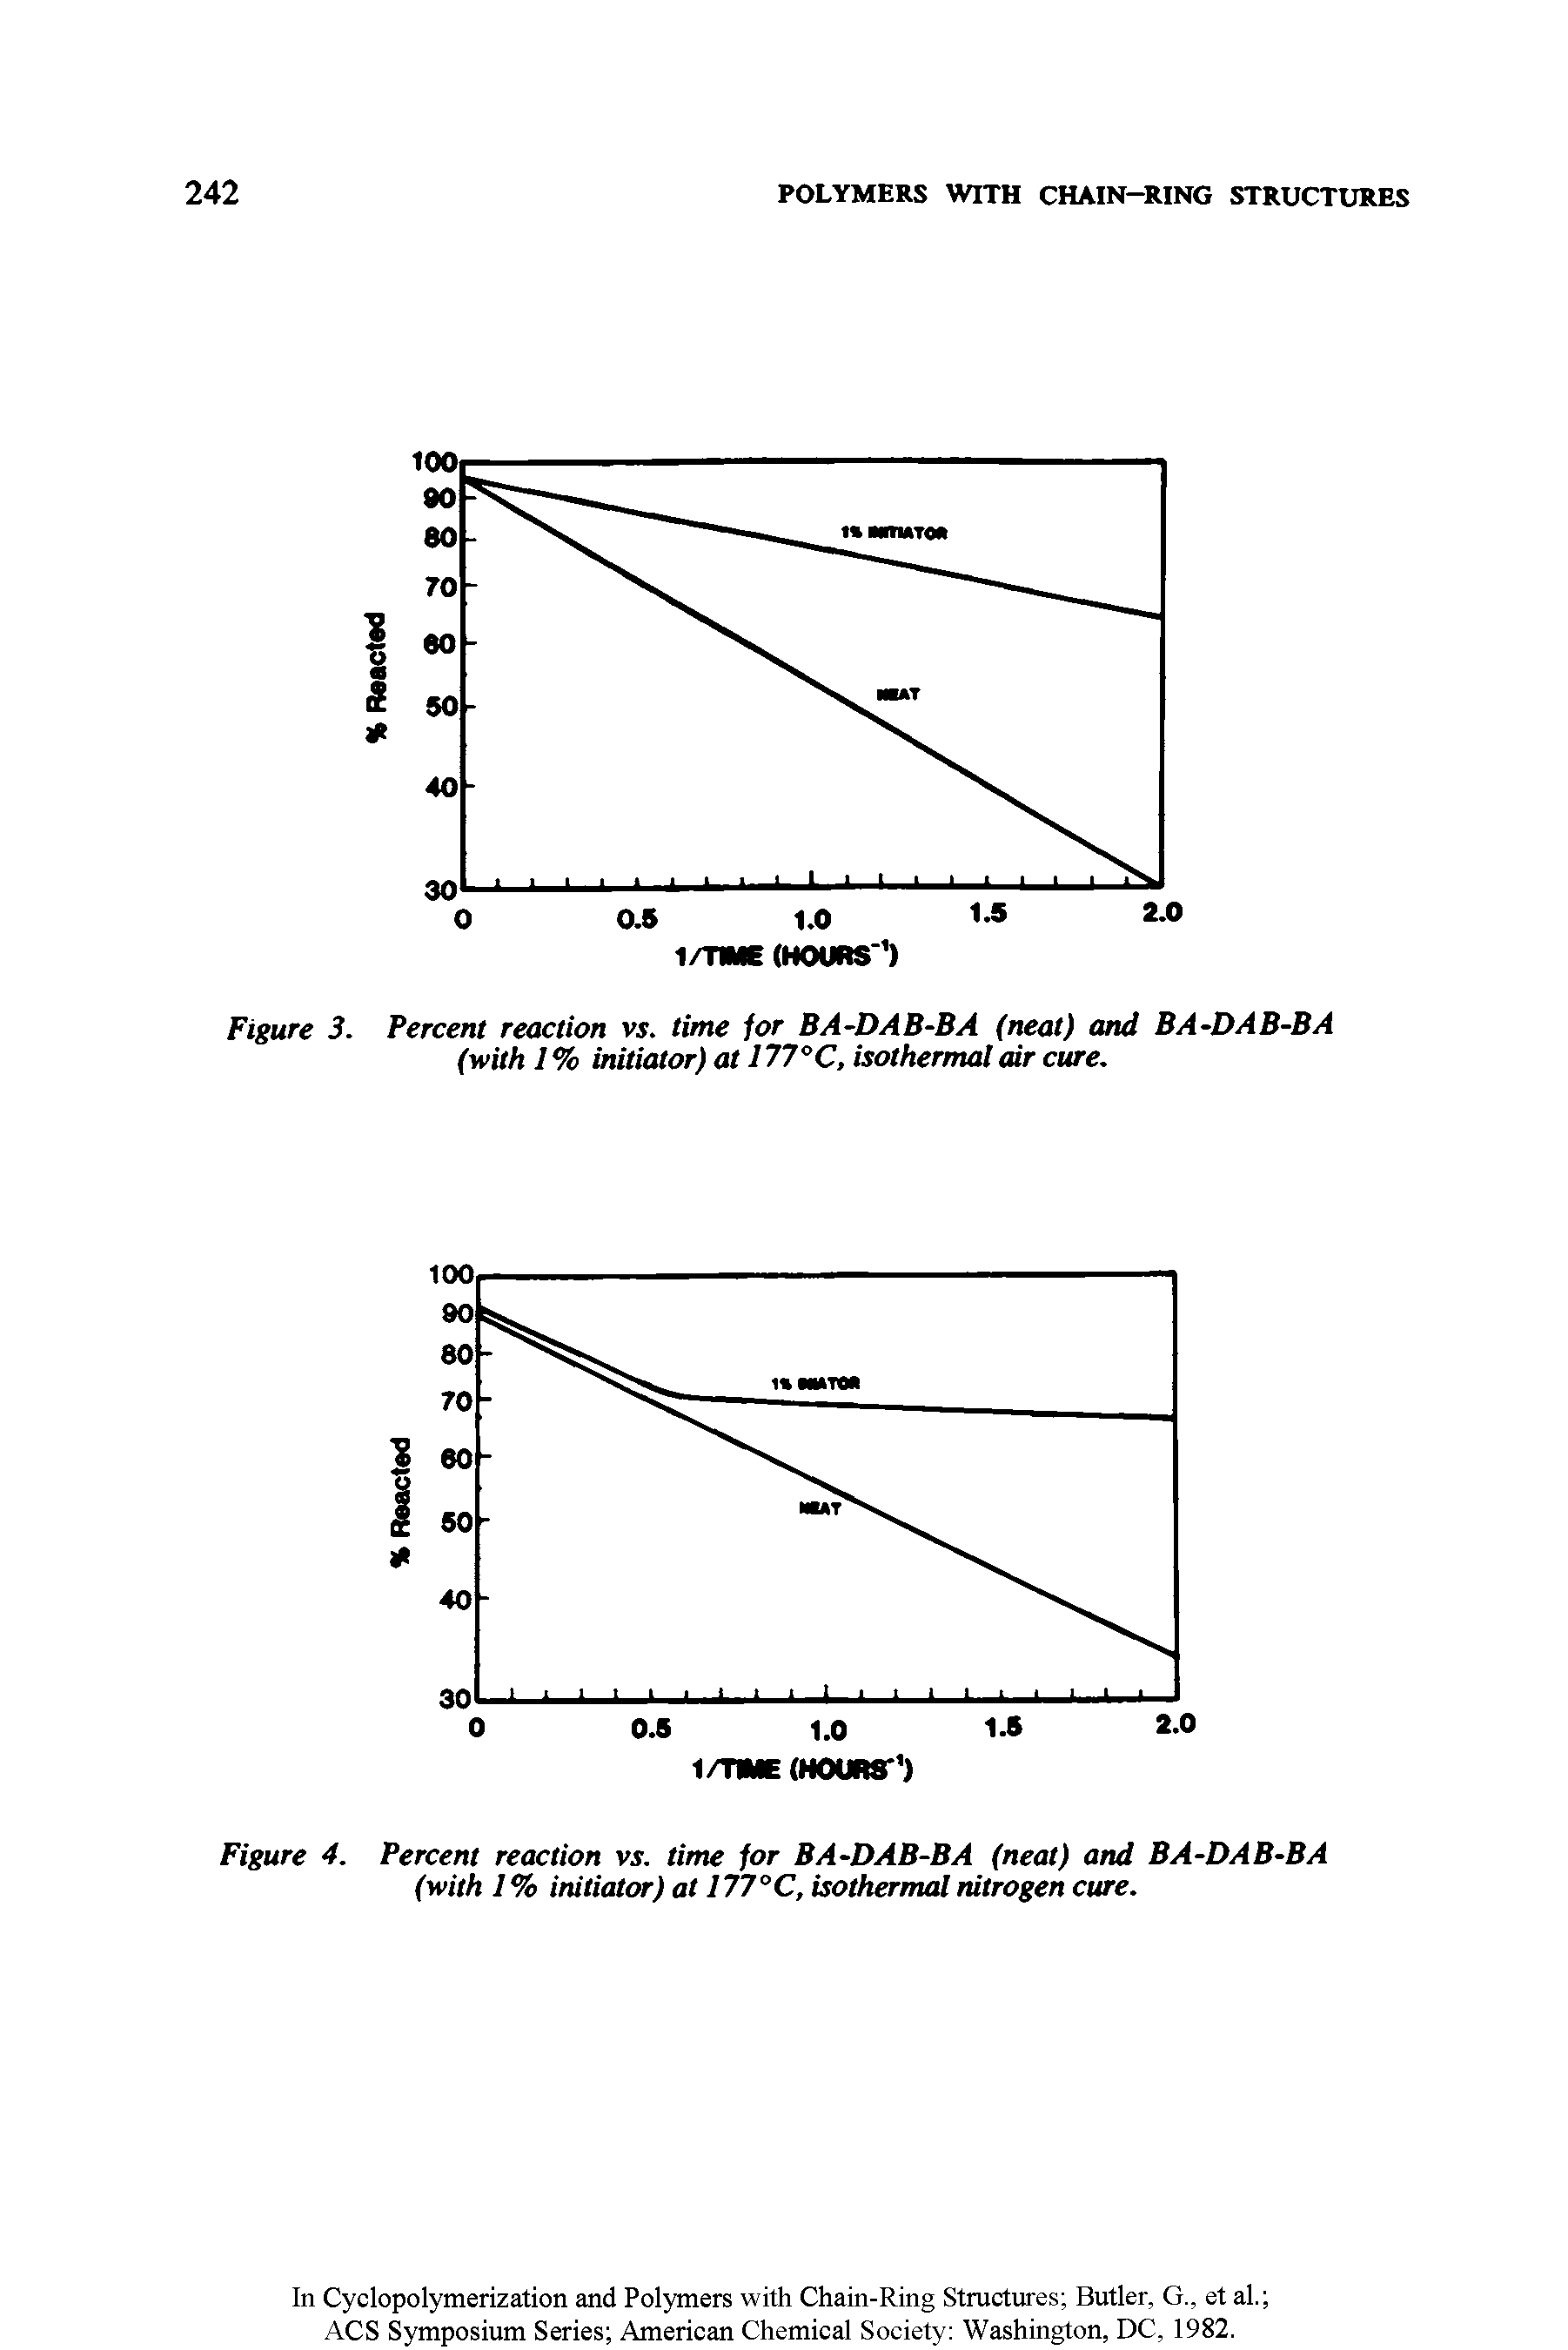 Figure 3. Percent reaction vs. time for BA-DAB-BA (neat) and BA-DAB-BA (with I % initiator) at 177°C, isothermal air cure.